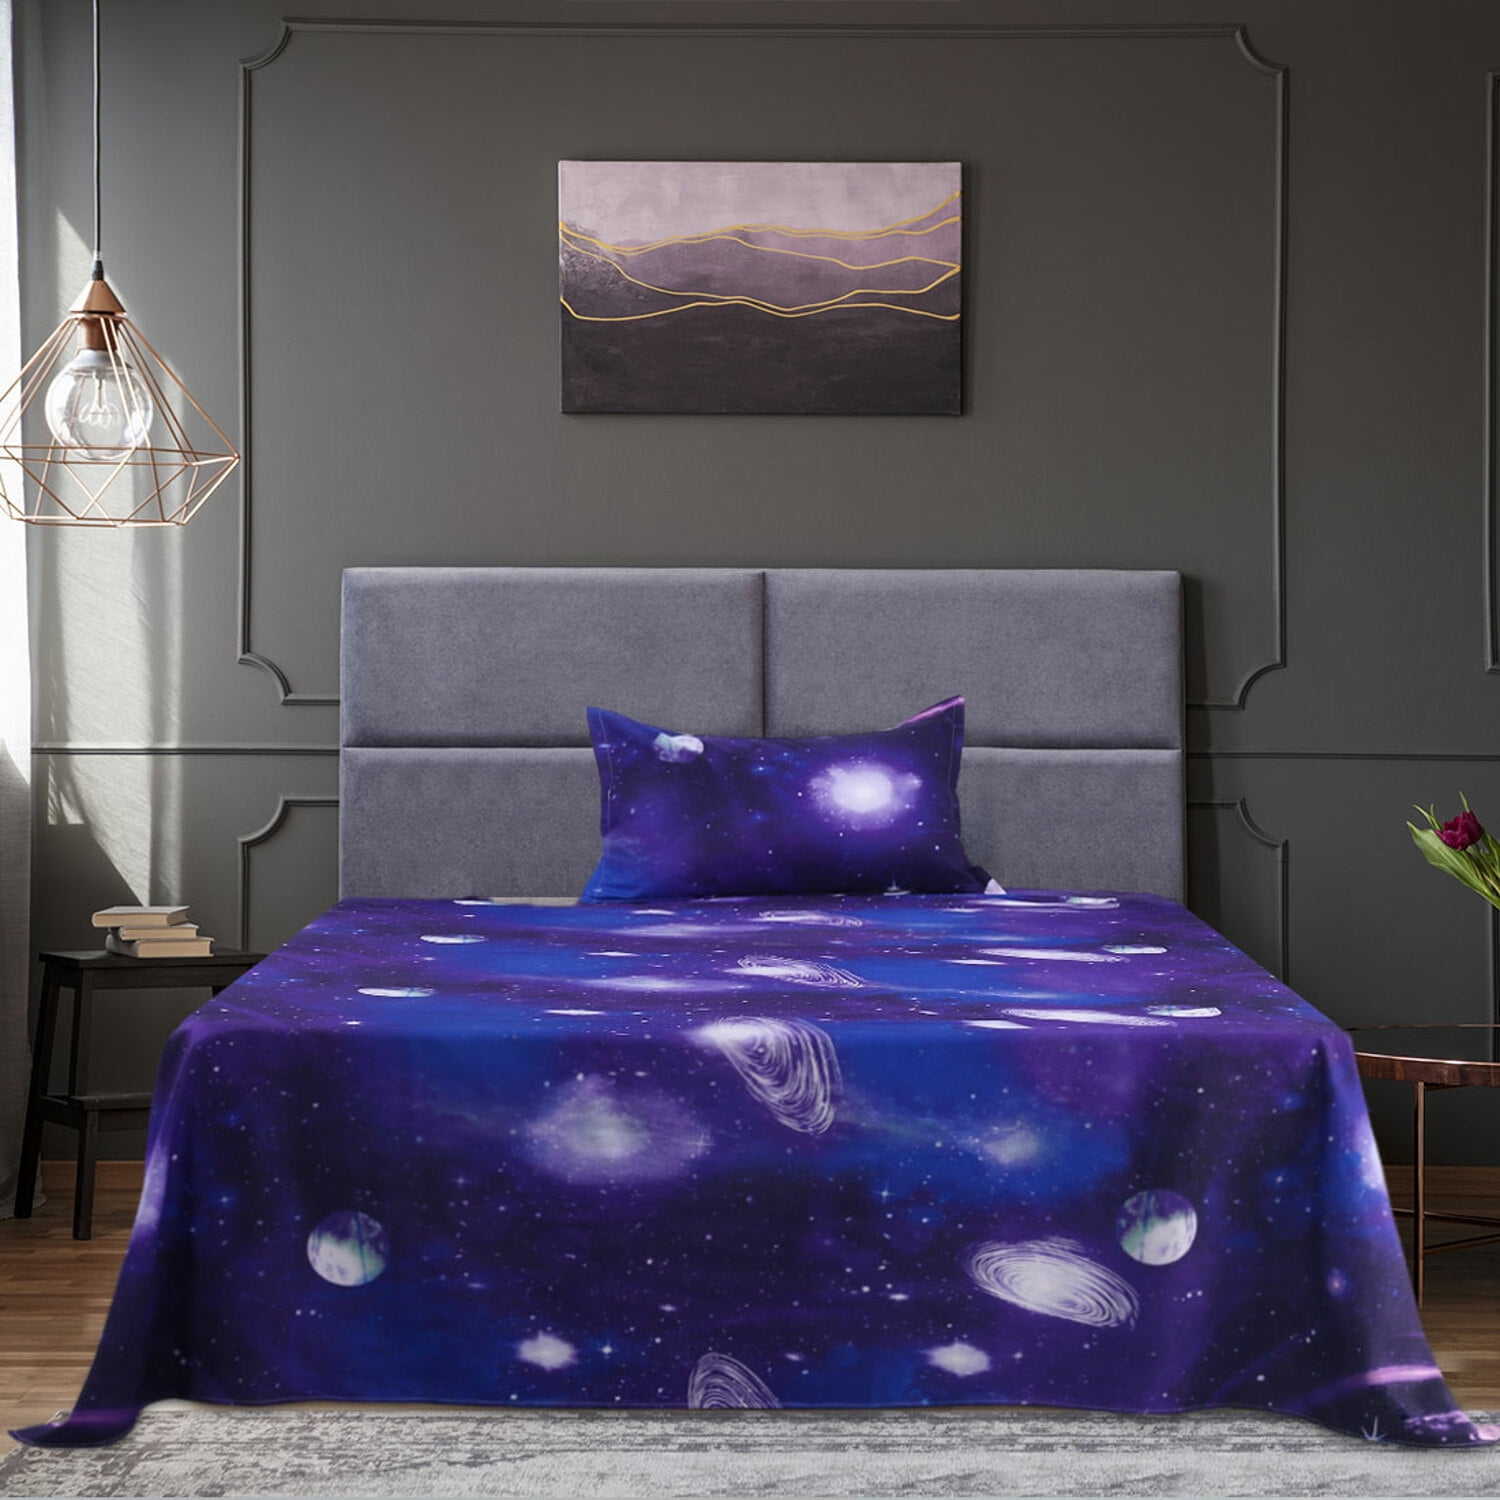 Stars Galaxy Fitted Sheet Set Double/Queen/King Size Bed Flat Sheet Pillow Cases 